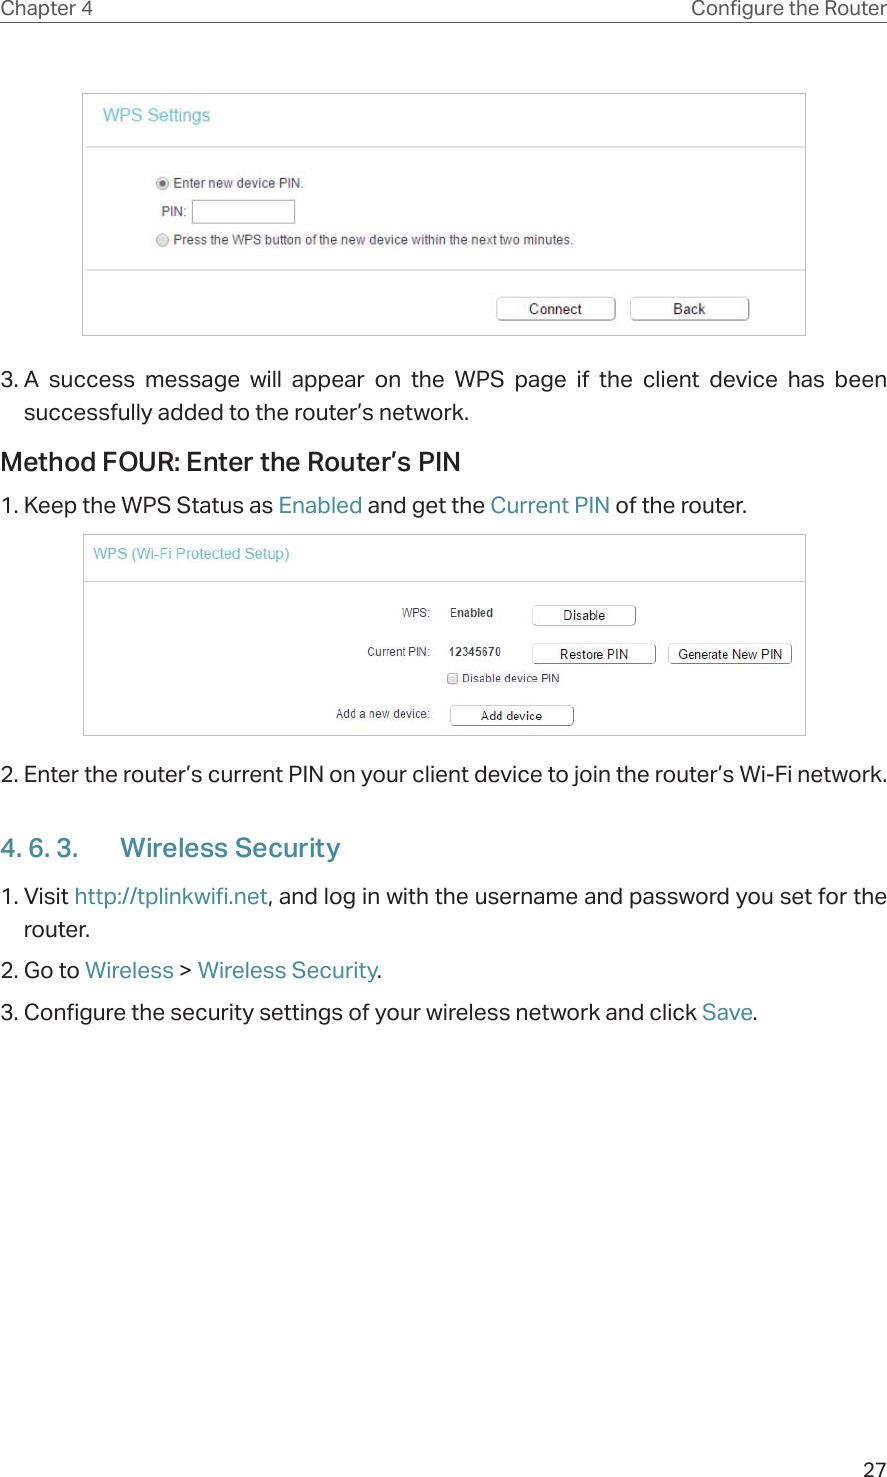 27Chapter 4 &amp;RQƮJXUHWKH5RXWHU3. A success message will appear on the WPS page if the client device has been successfully added to the router’s network.Method FOUR: Enter the Router’s PIN1. Keep the WPS Status as Enabled and get the Current PIN of the router.2. Enter the router’s current PIN on your client device to join the router’s Wi-Fi network.4. 6. 3.  Wireless Security1. Visit http://tplinkwifi.net, and log in with the username and password you set for the router.2. Go to Wireless &gt; Wireless Security. 3. Configure the security settings of your wireless network and click Save.